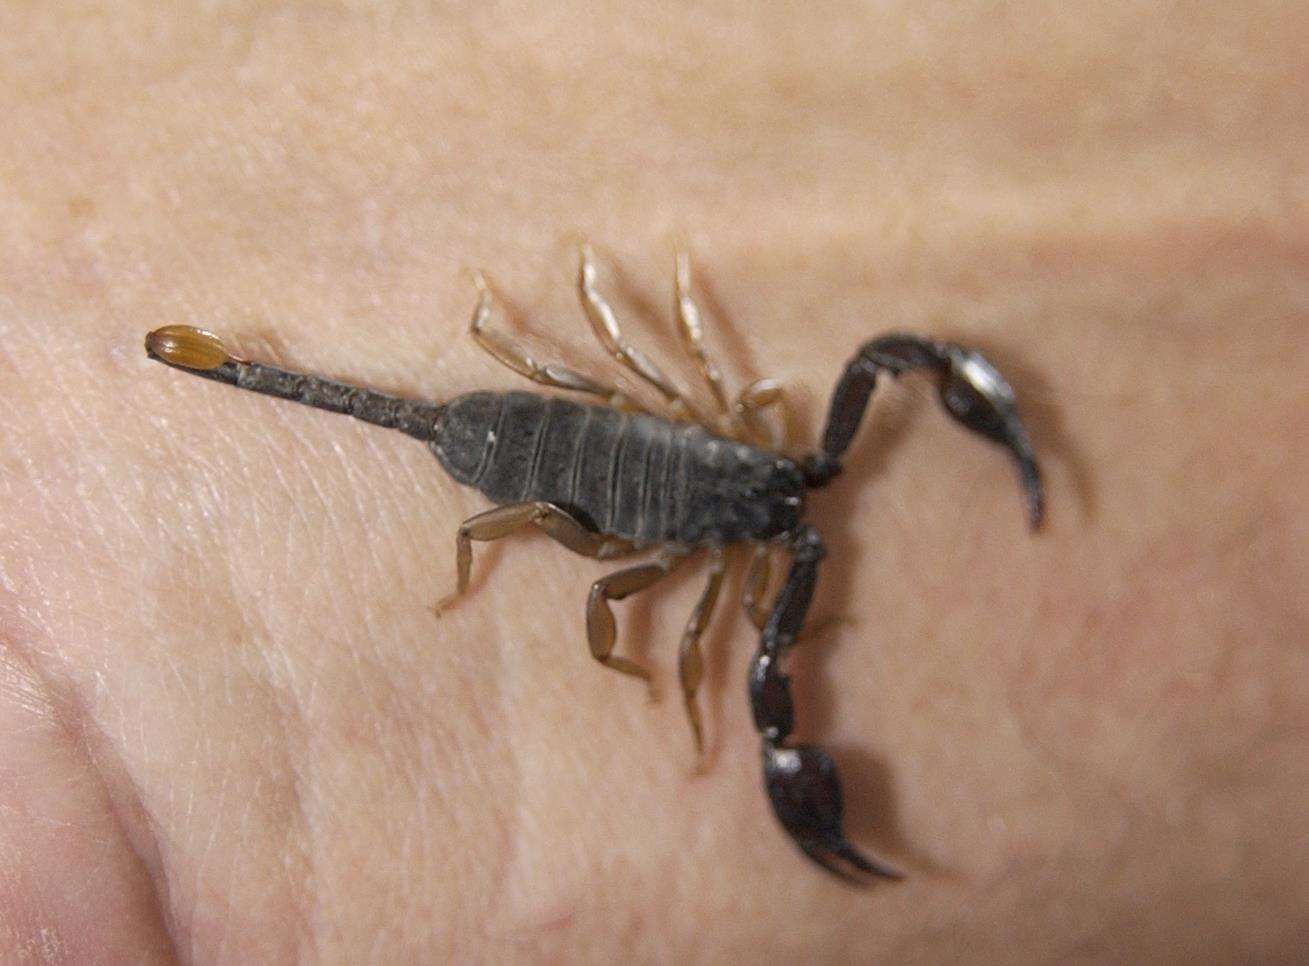 A Scorpions discovered at the Sheerness Docks